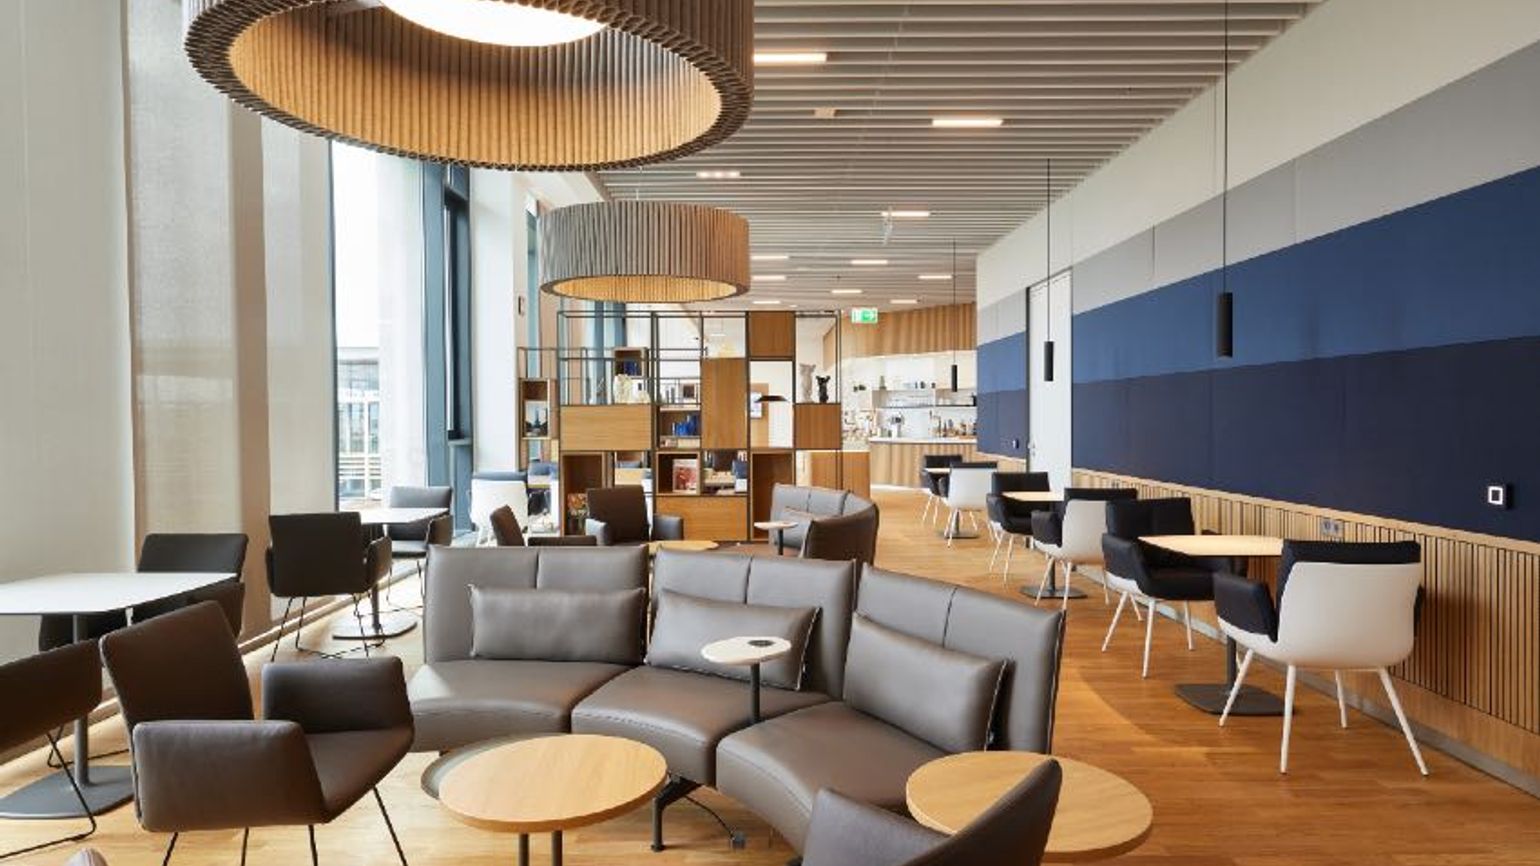 Lufthansa to open two new lounges at Berlin airport